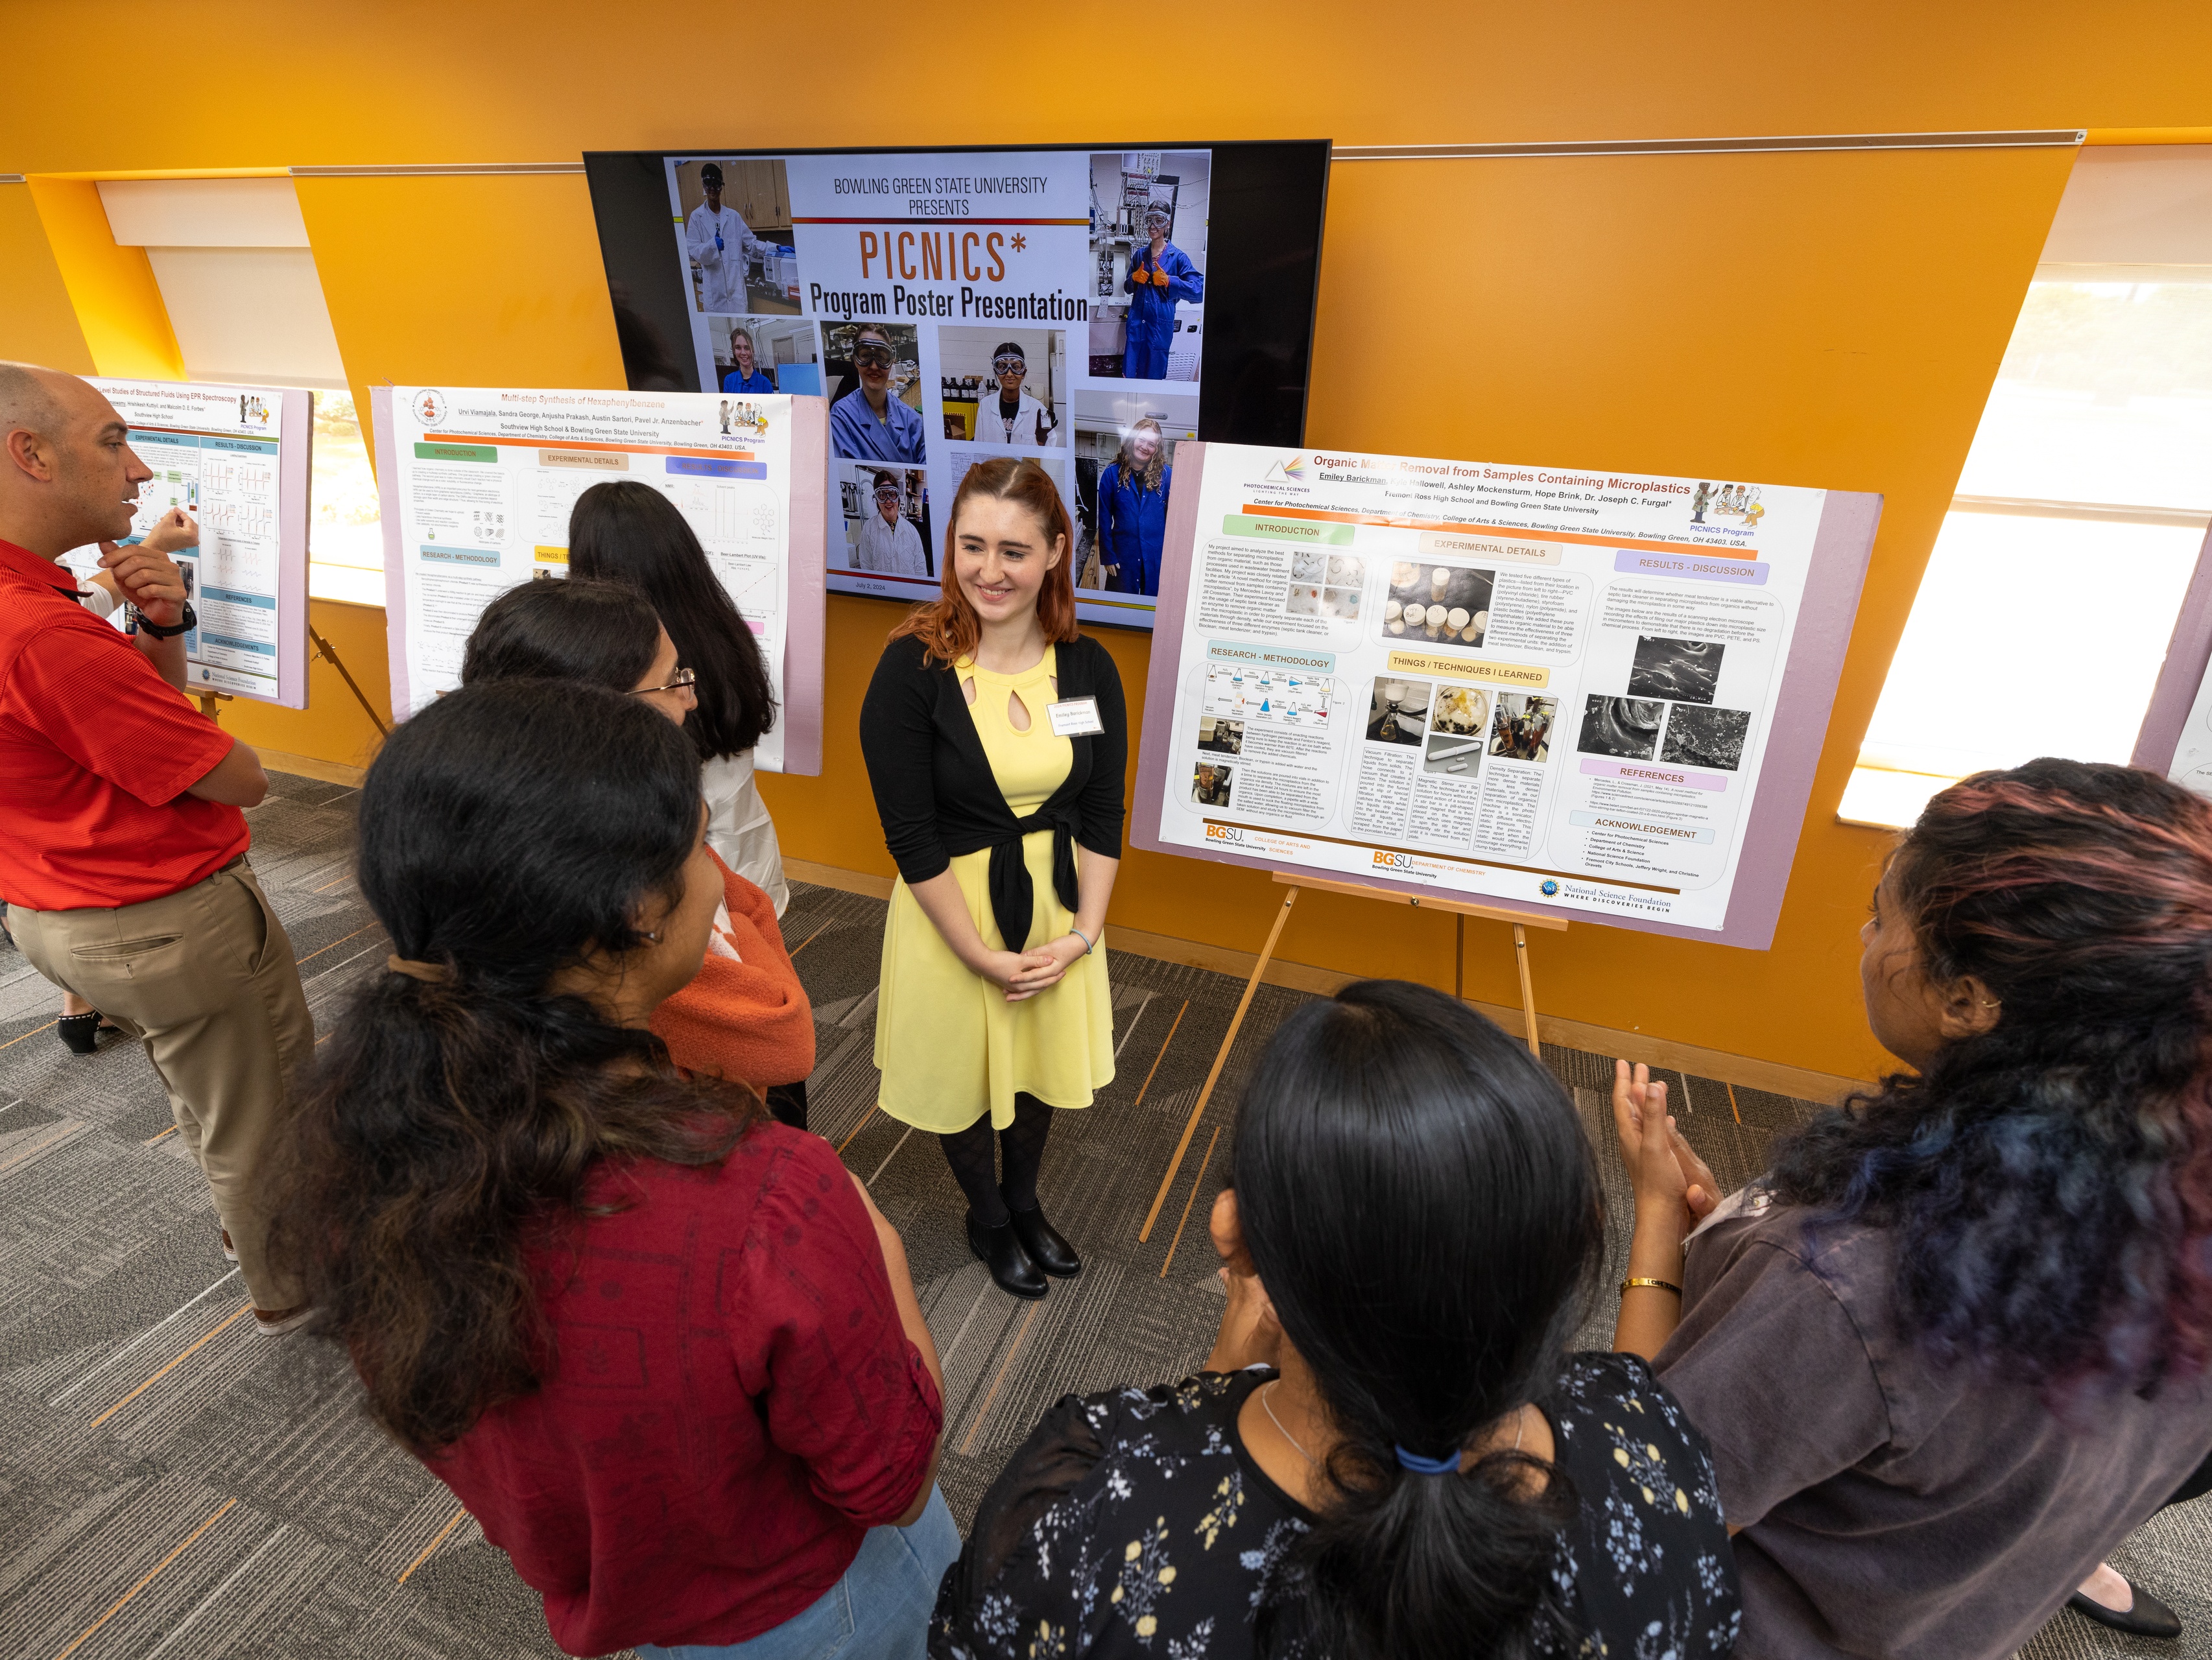 A high school student stands next to a board discussing her research with others